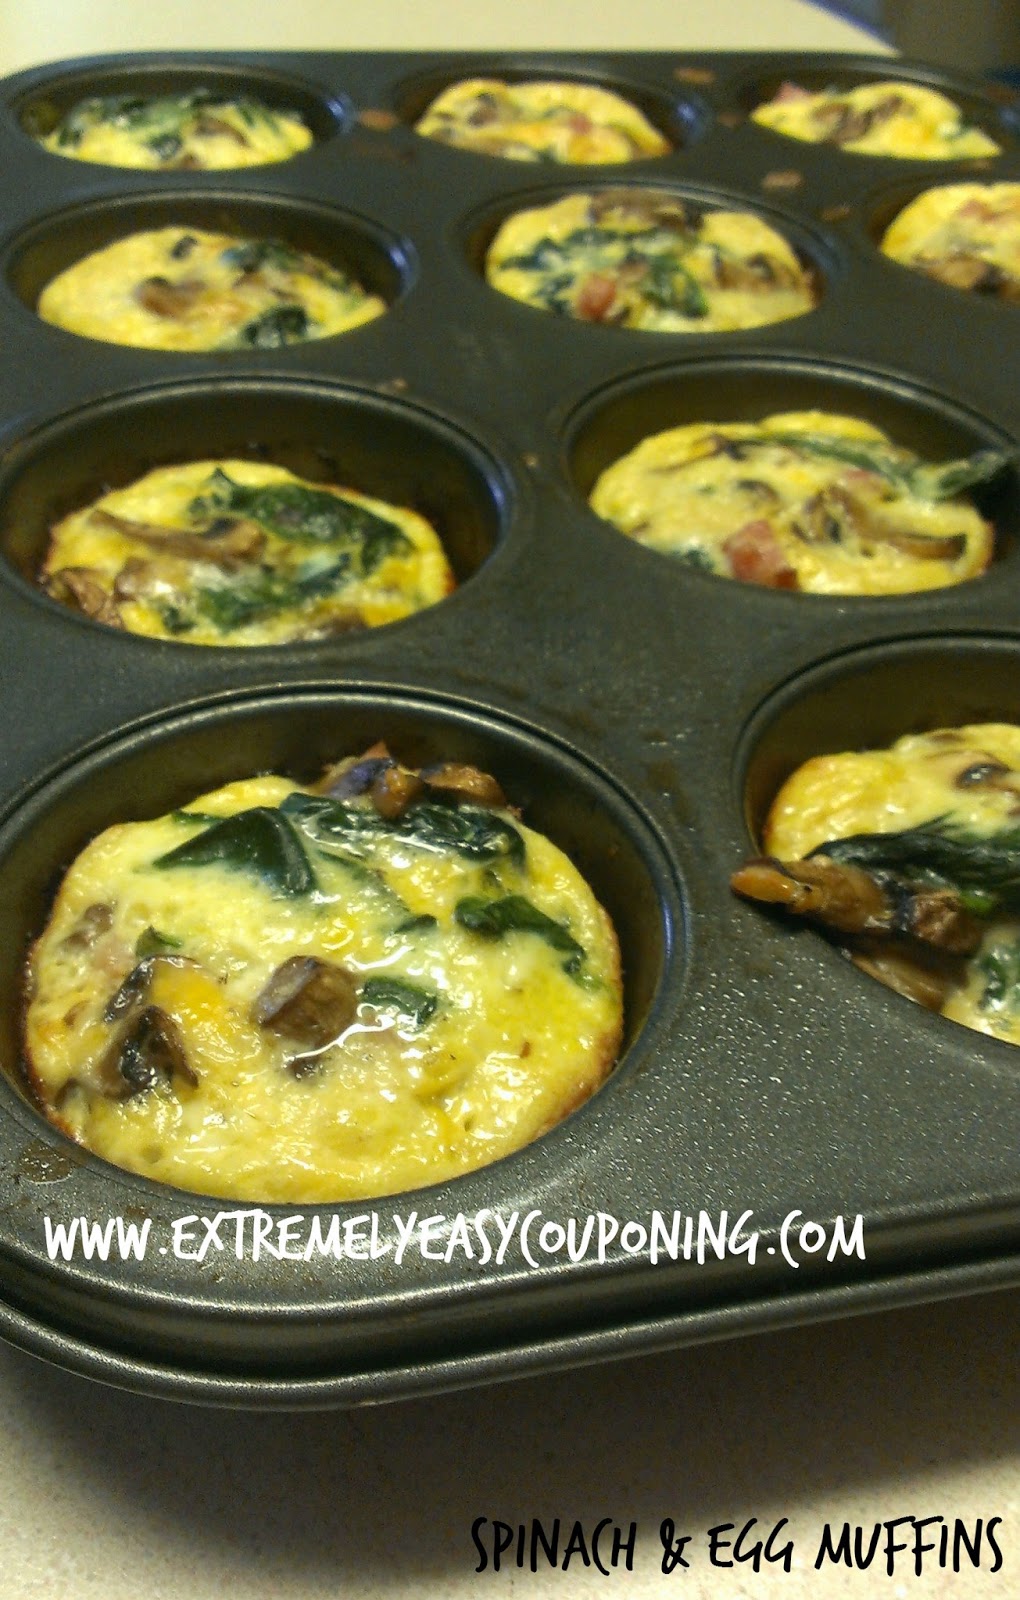 Extremely Easy Couponing: Spinach Egg Muffin Recipe - low carb!